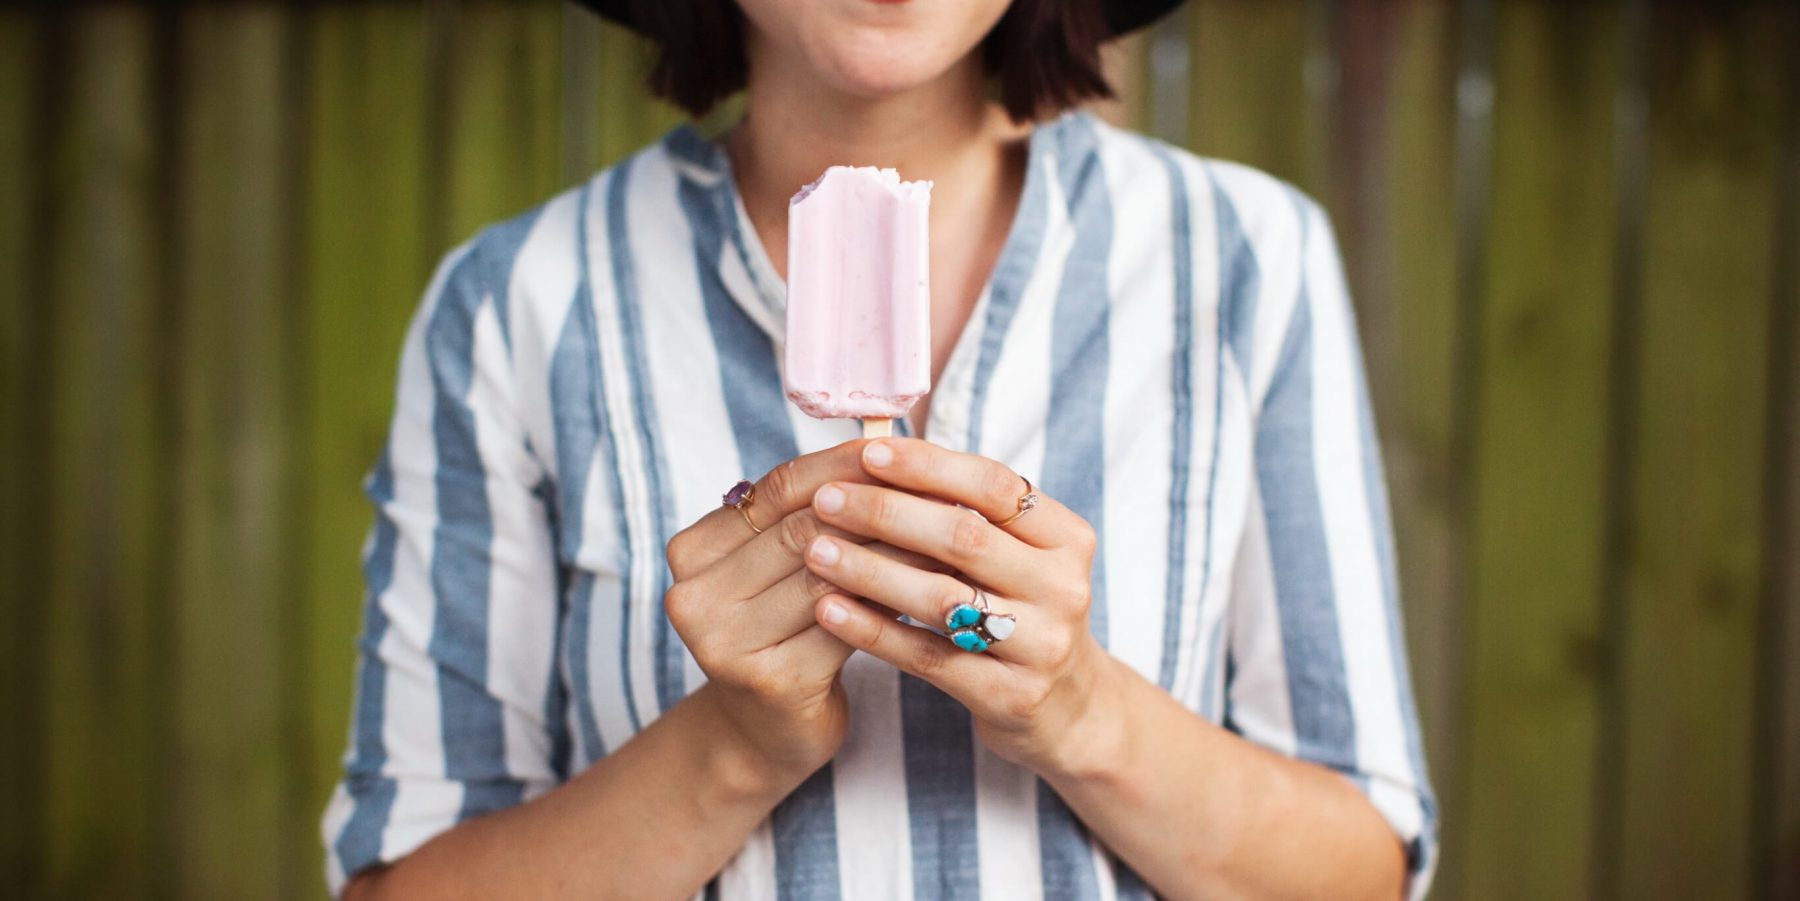 woman holding pink popsicle